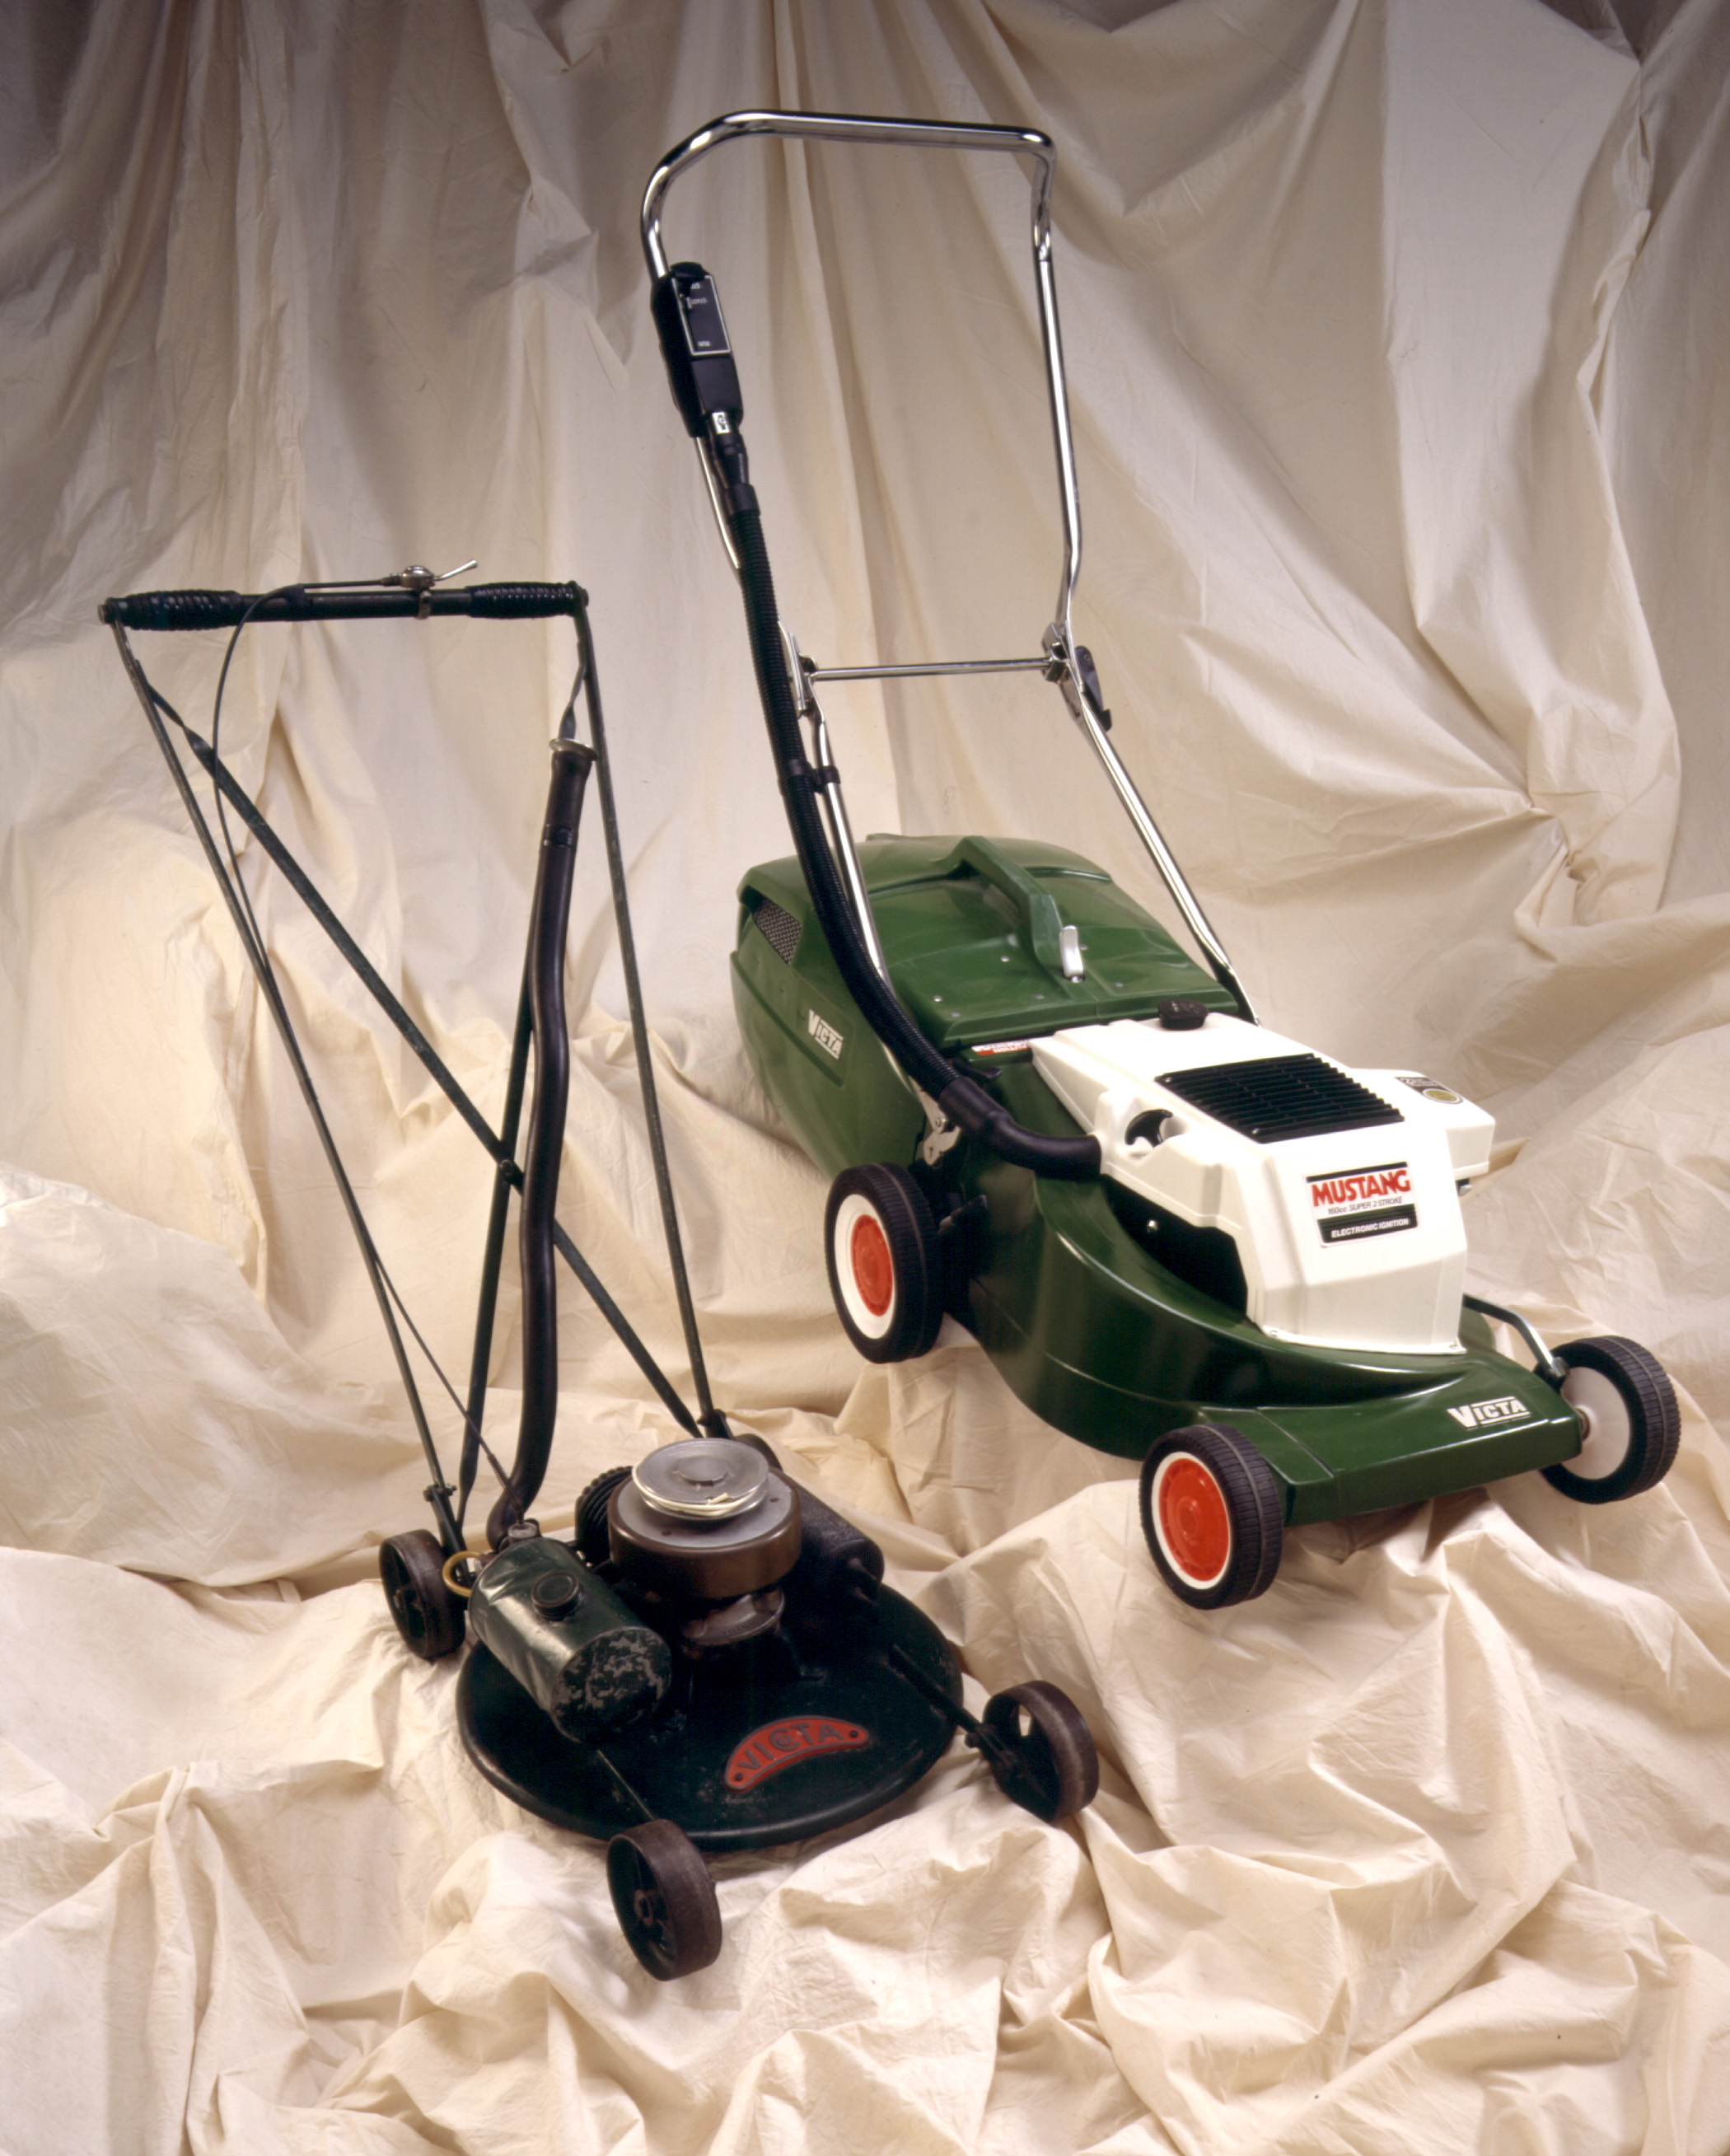 Victa lawnmower, first off the production line